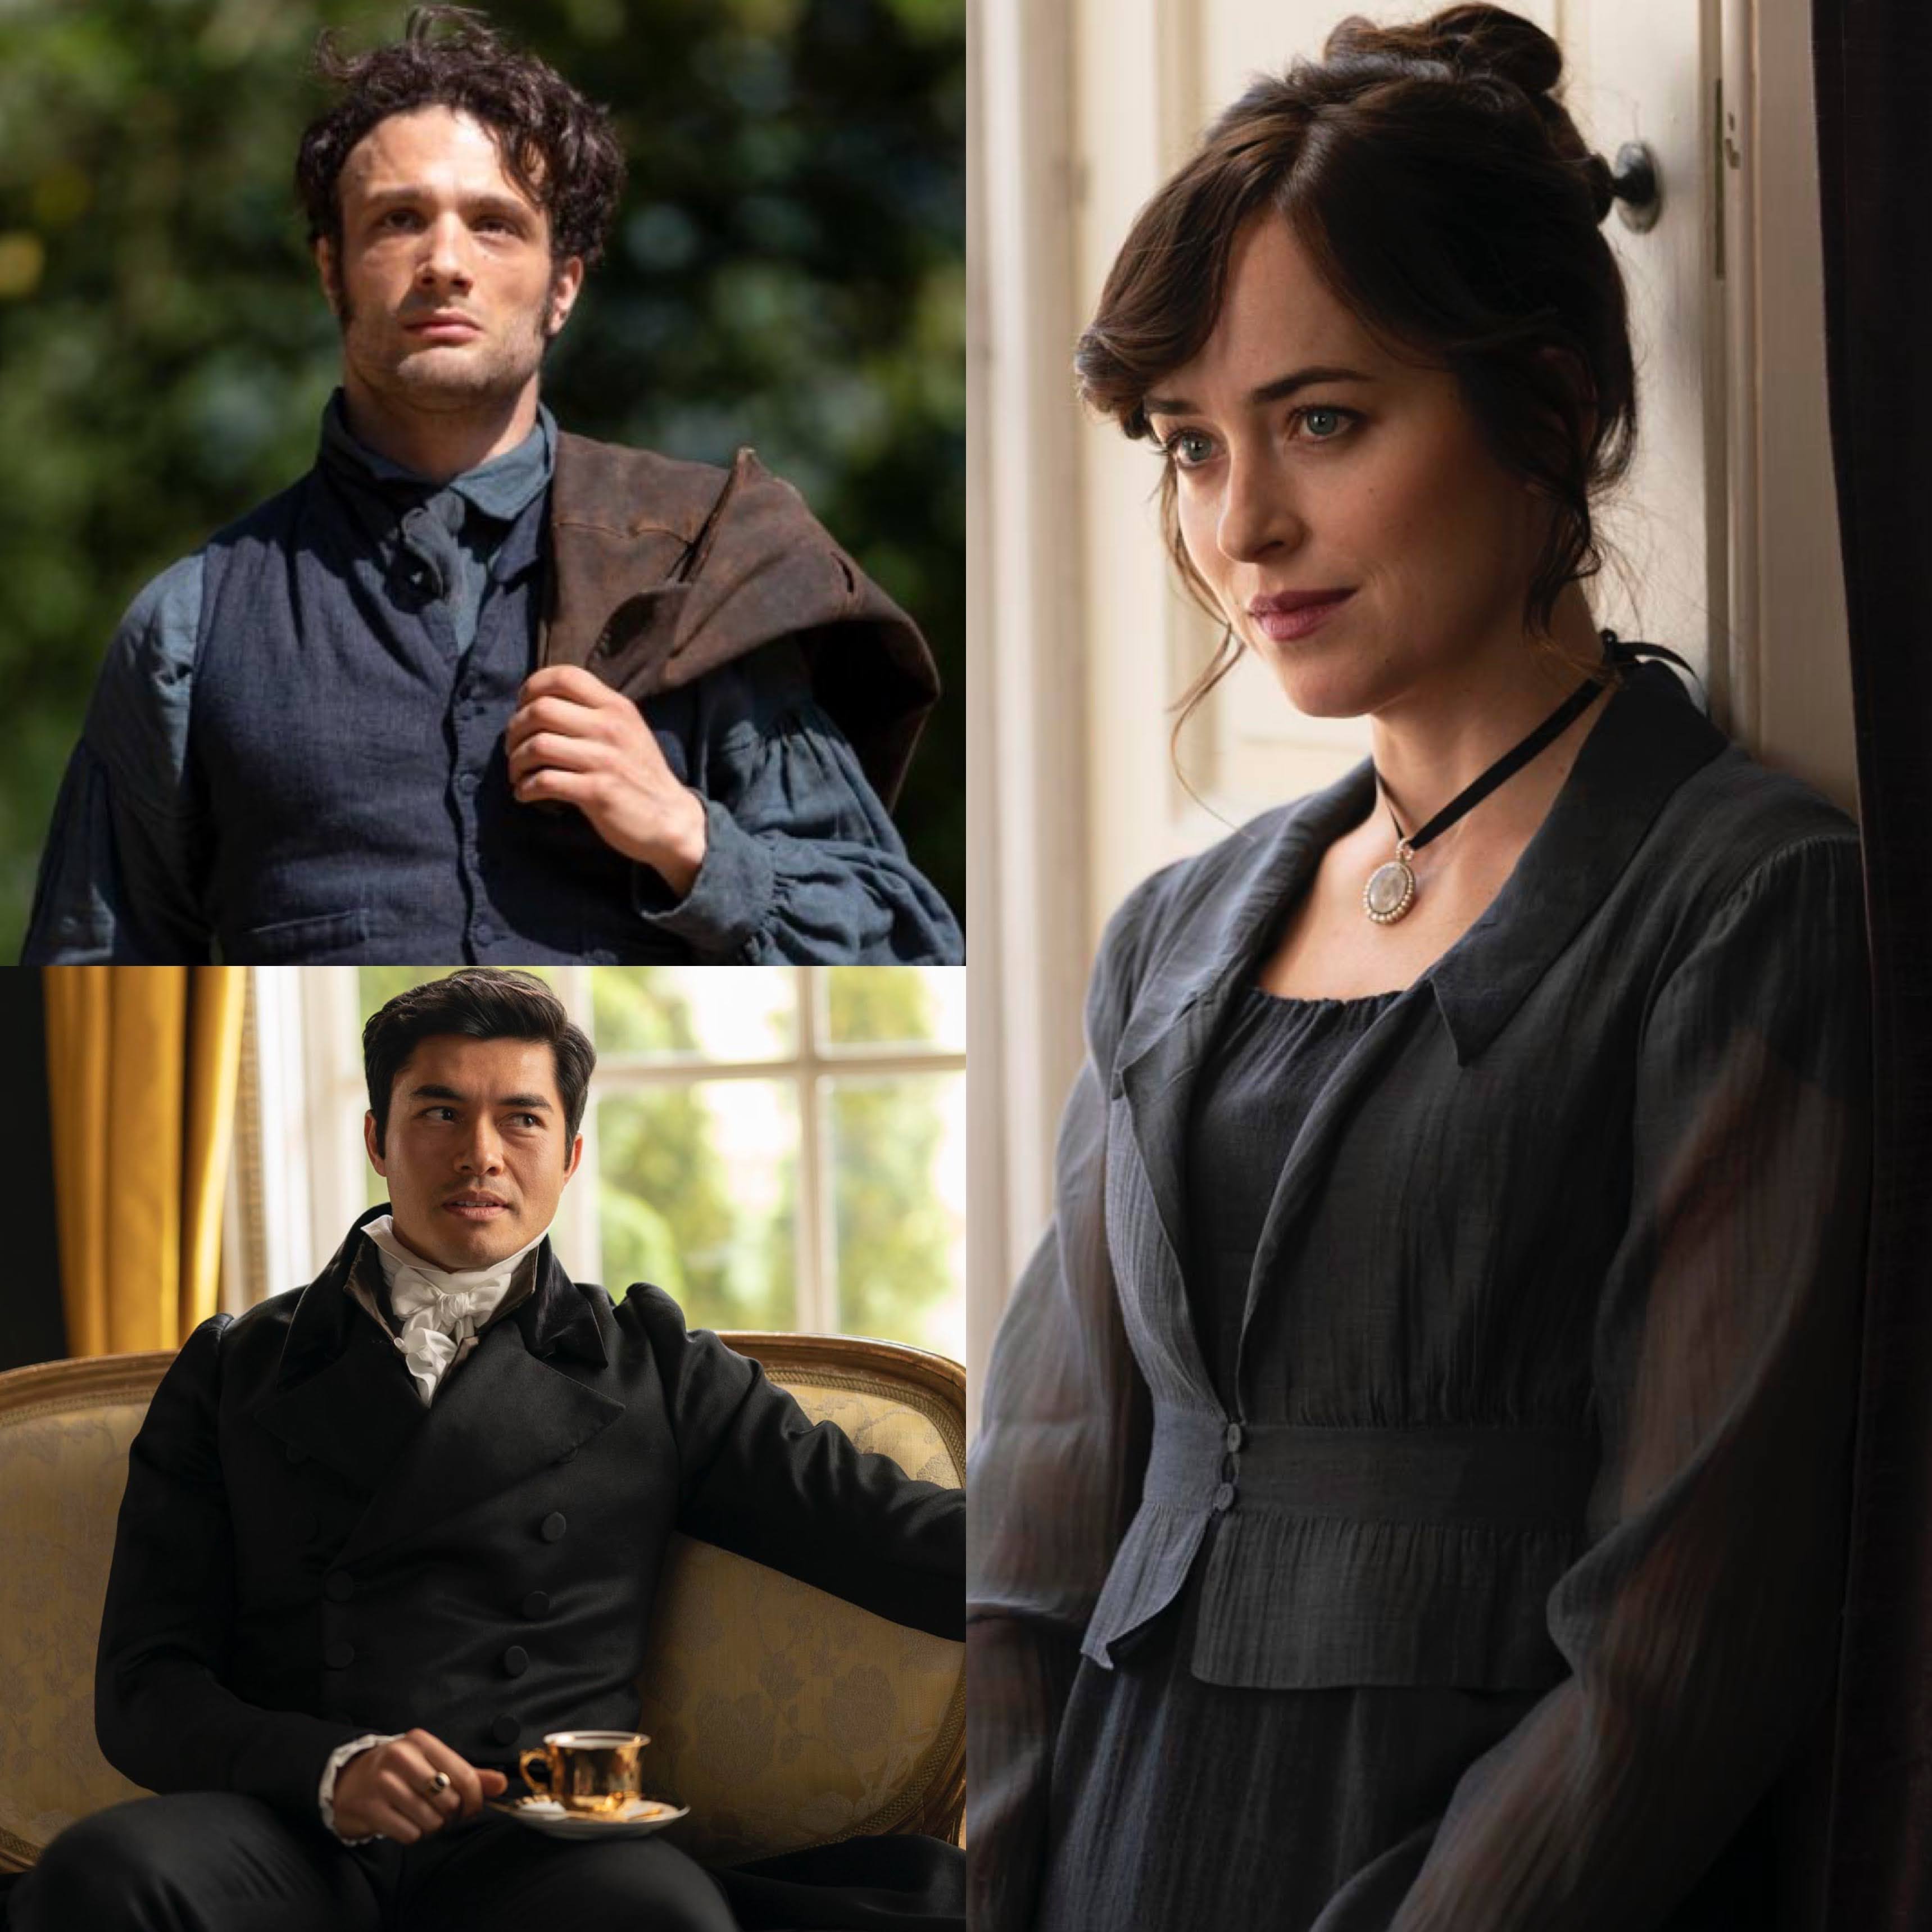 First Look of Dakota Johnson, Cosmo Jarvis, and Henry Golding in Netflix's  'Persuasion'